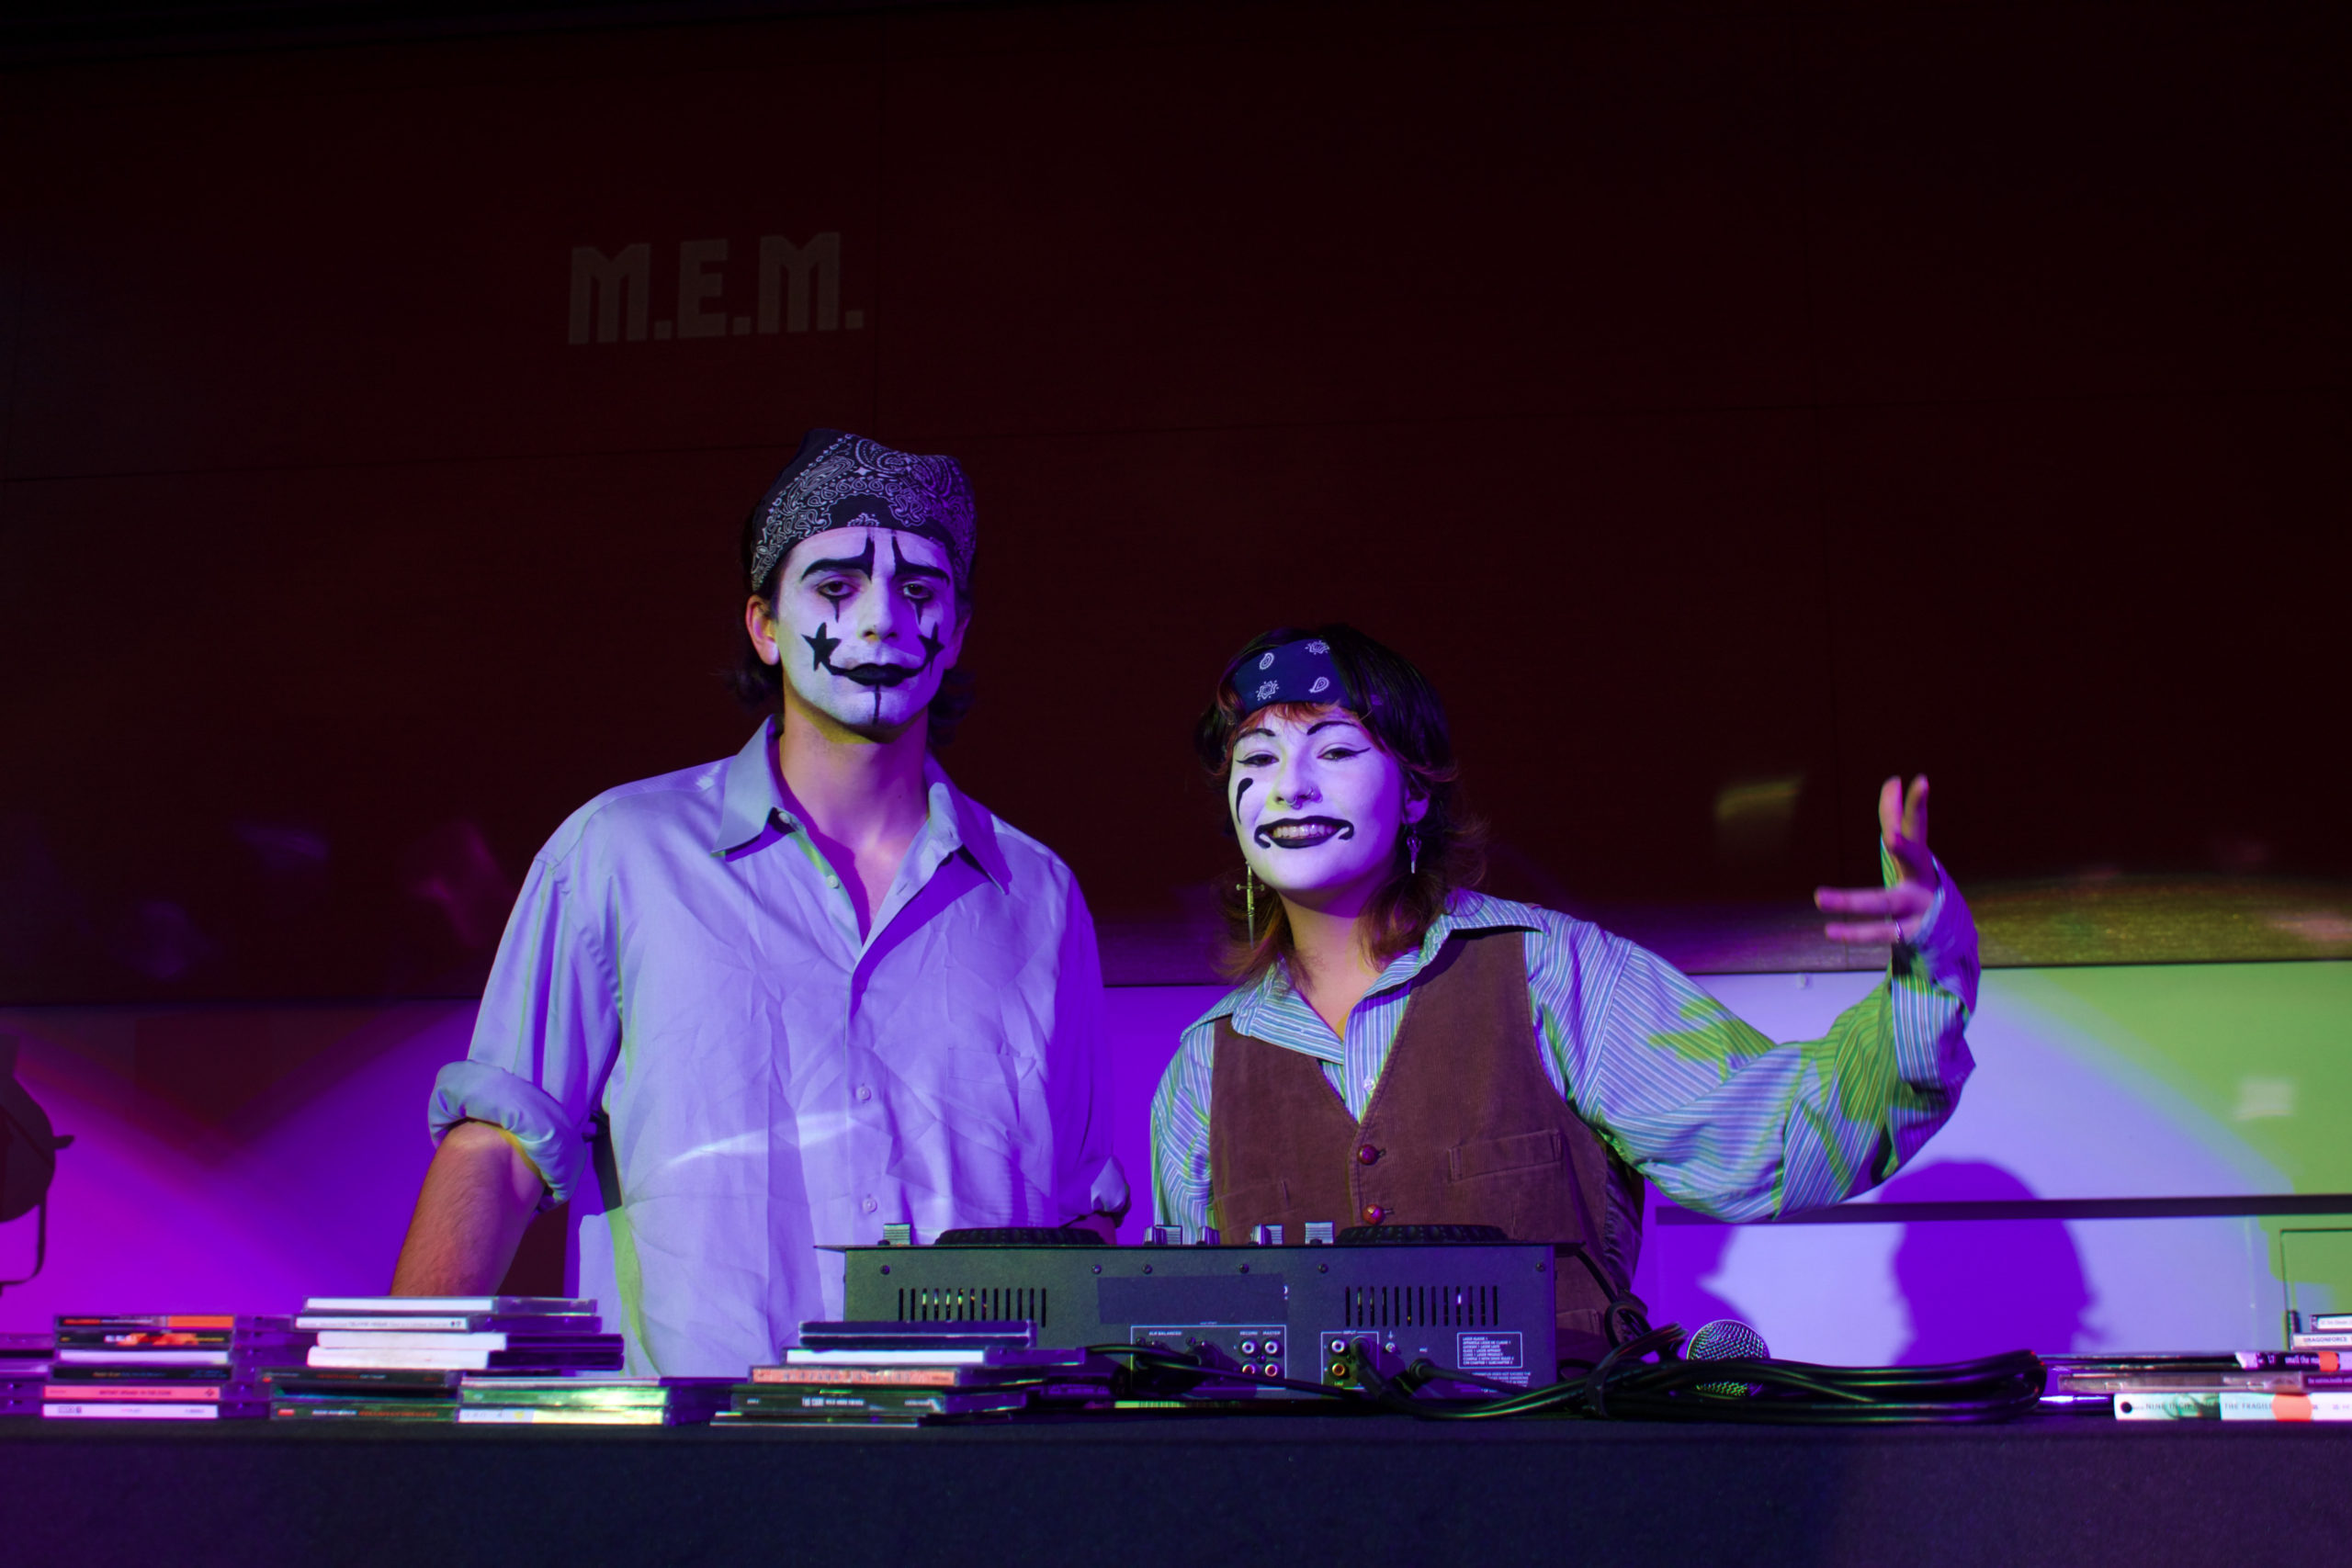 Two DJ's pose for a picture in their ghoulish makeup.